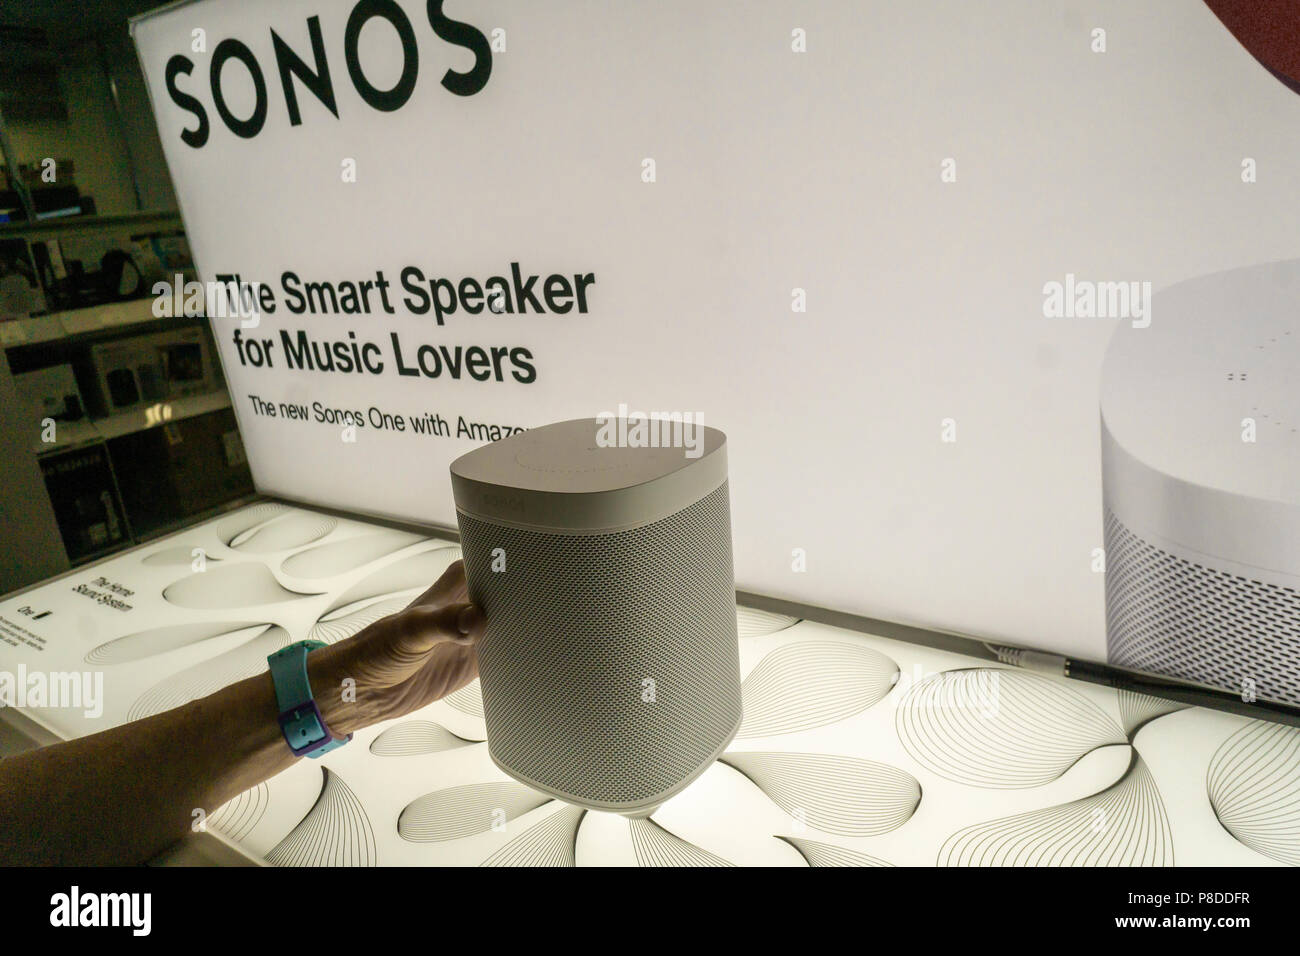 Sonos High Resolution Stock Photography and Images - Alamy